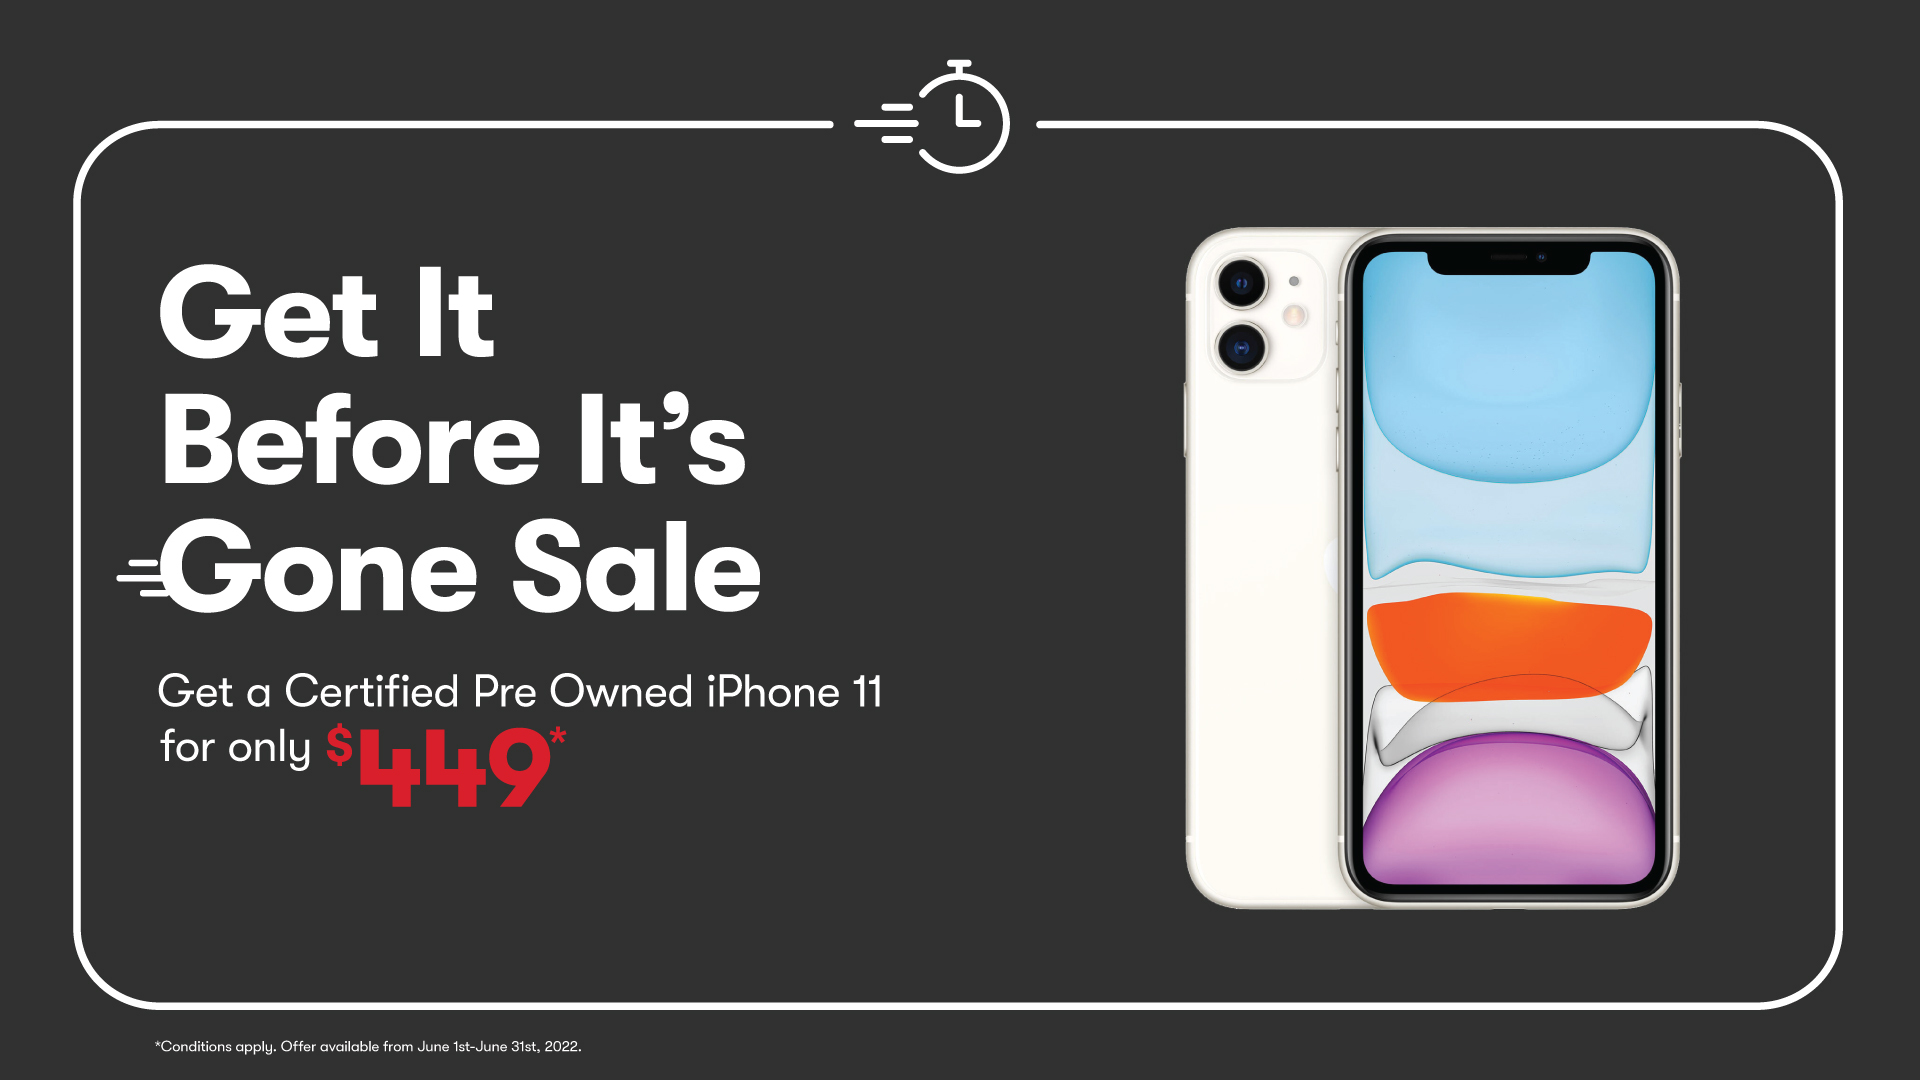 Offer title Get It Before It’s Gone Sale! Get a Certified Pre-Owned iPhone 11 for only $449*